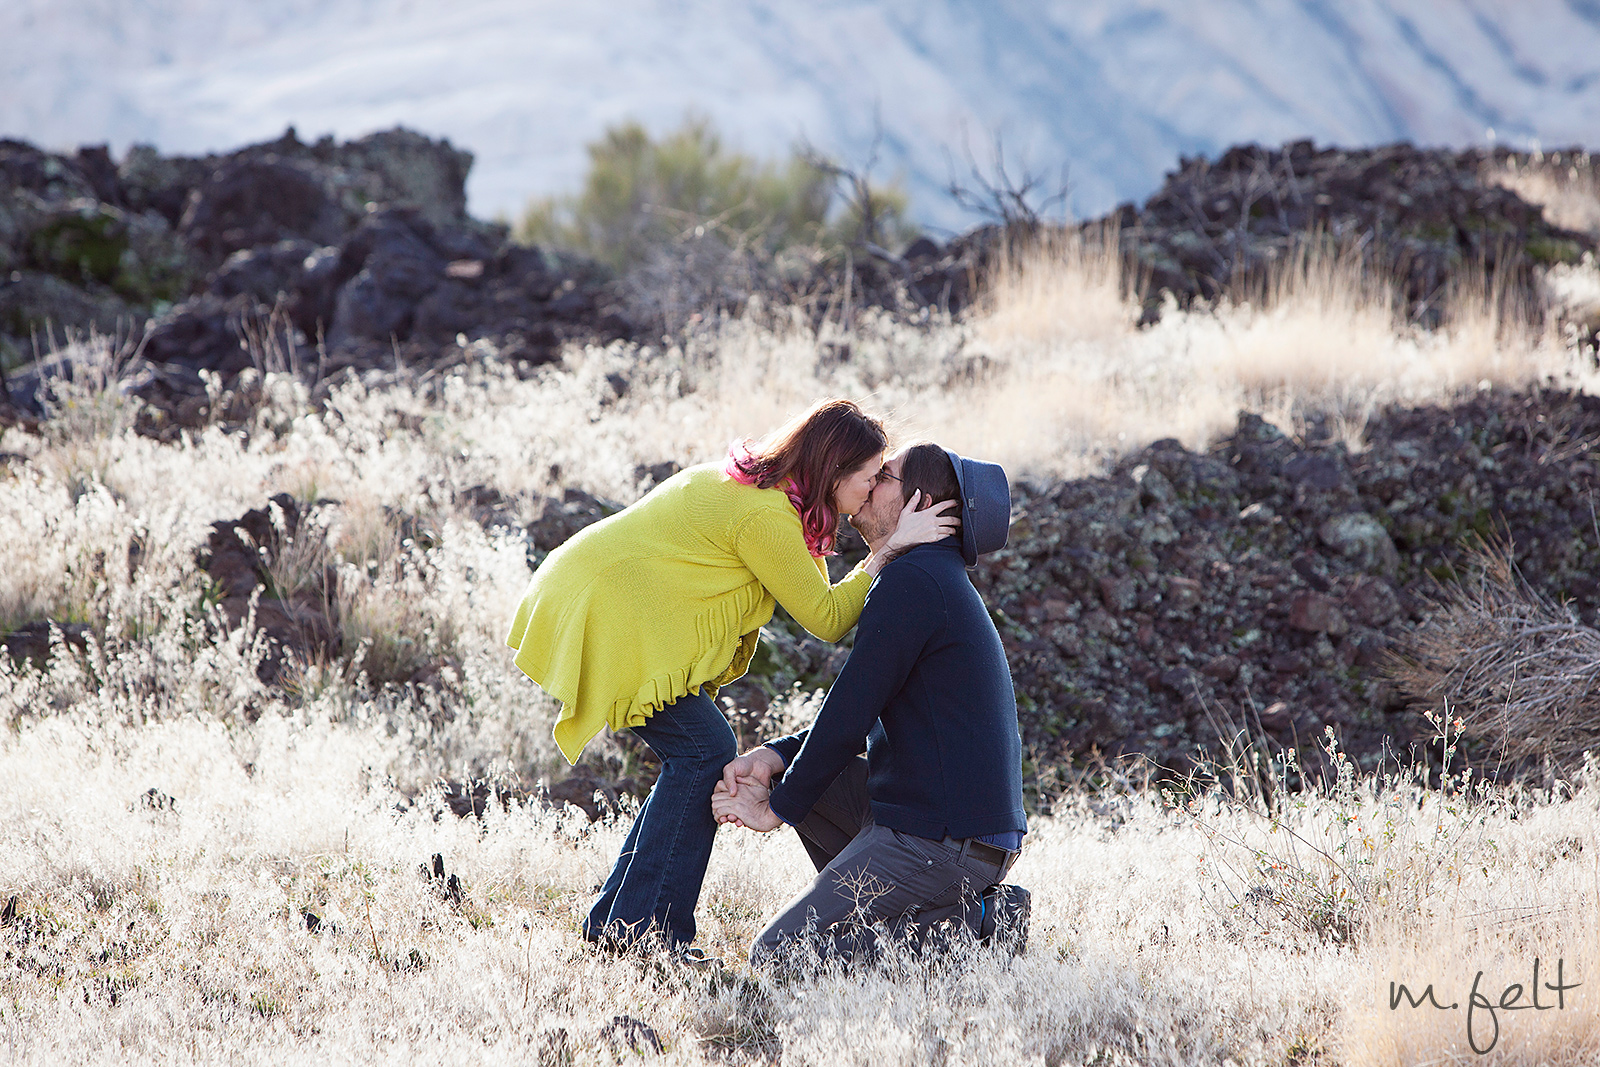 Ingrid Accepting Russell's Proposal - Southern Utah Engagement - M Felt Photography - www.mfeltphotography.com